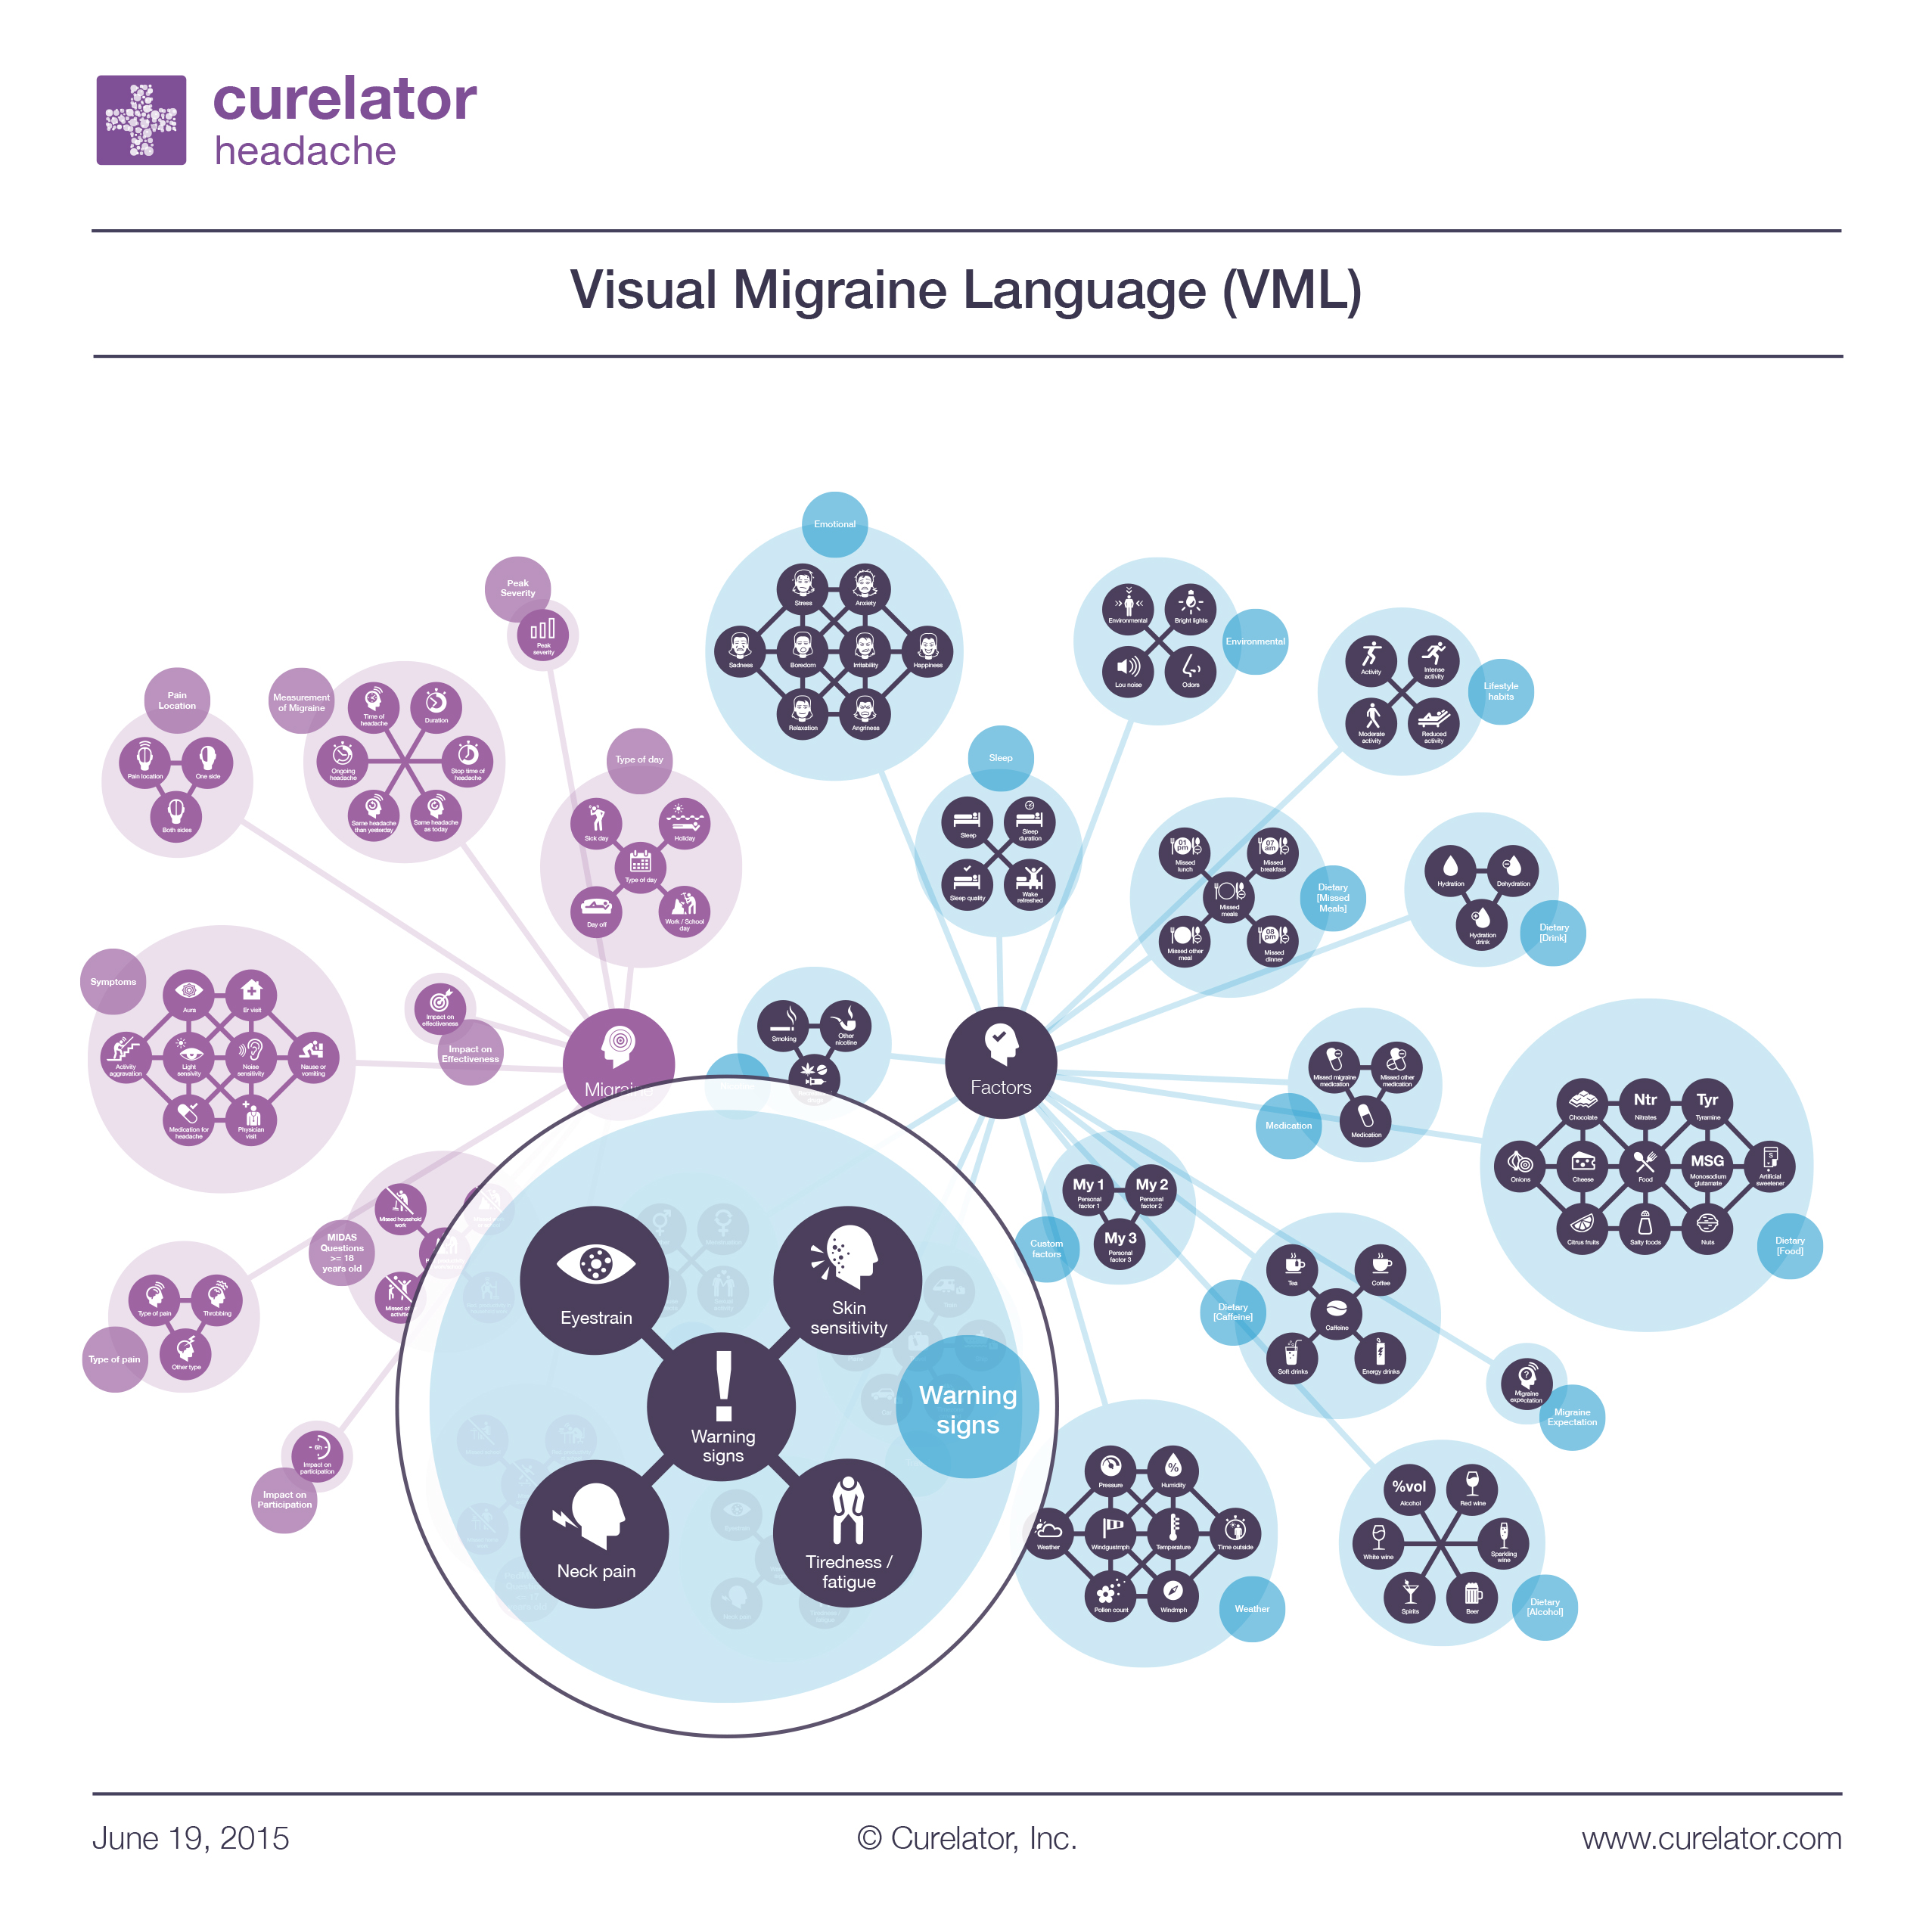 The Visual Migraine Language (VML) organizes factors commonly believed to influence migraine attacks.